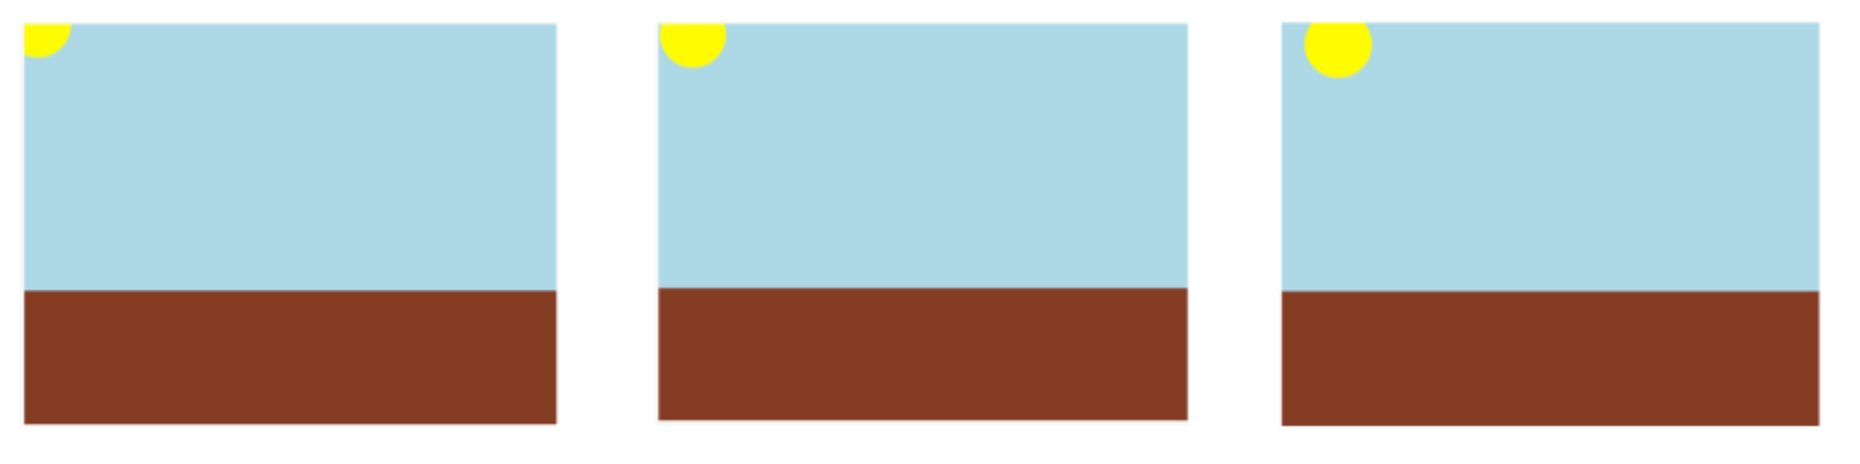 Two frames of the sunset animation, side by side. Both have a yellow circle in the top-left corner and a brown rectangle along the bottom. In the second frame, the sun has moved slightly lower and to the right.